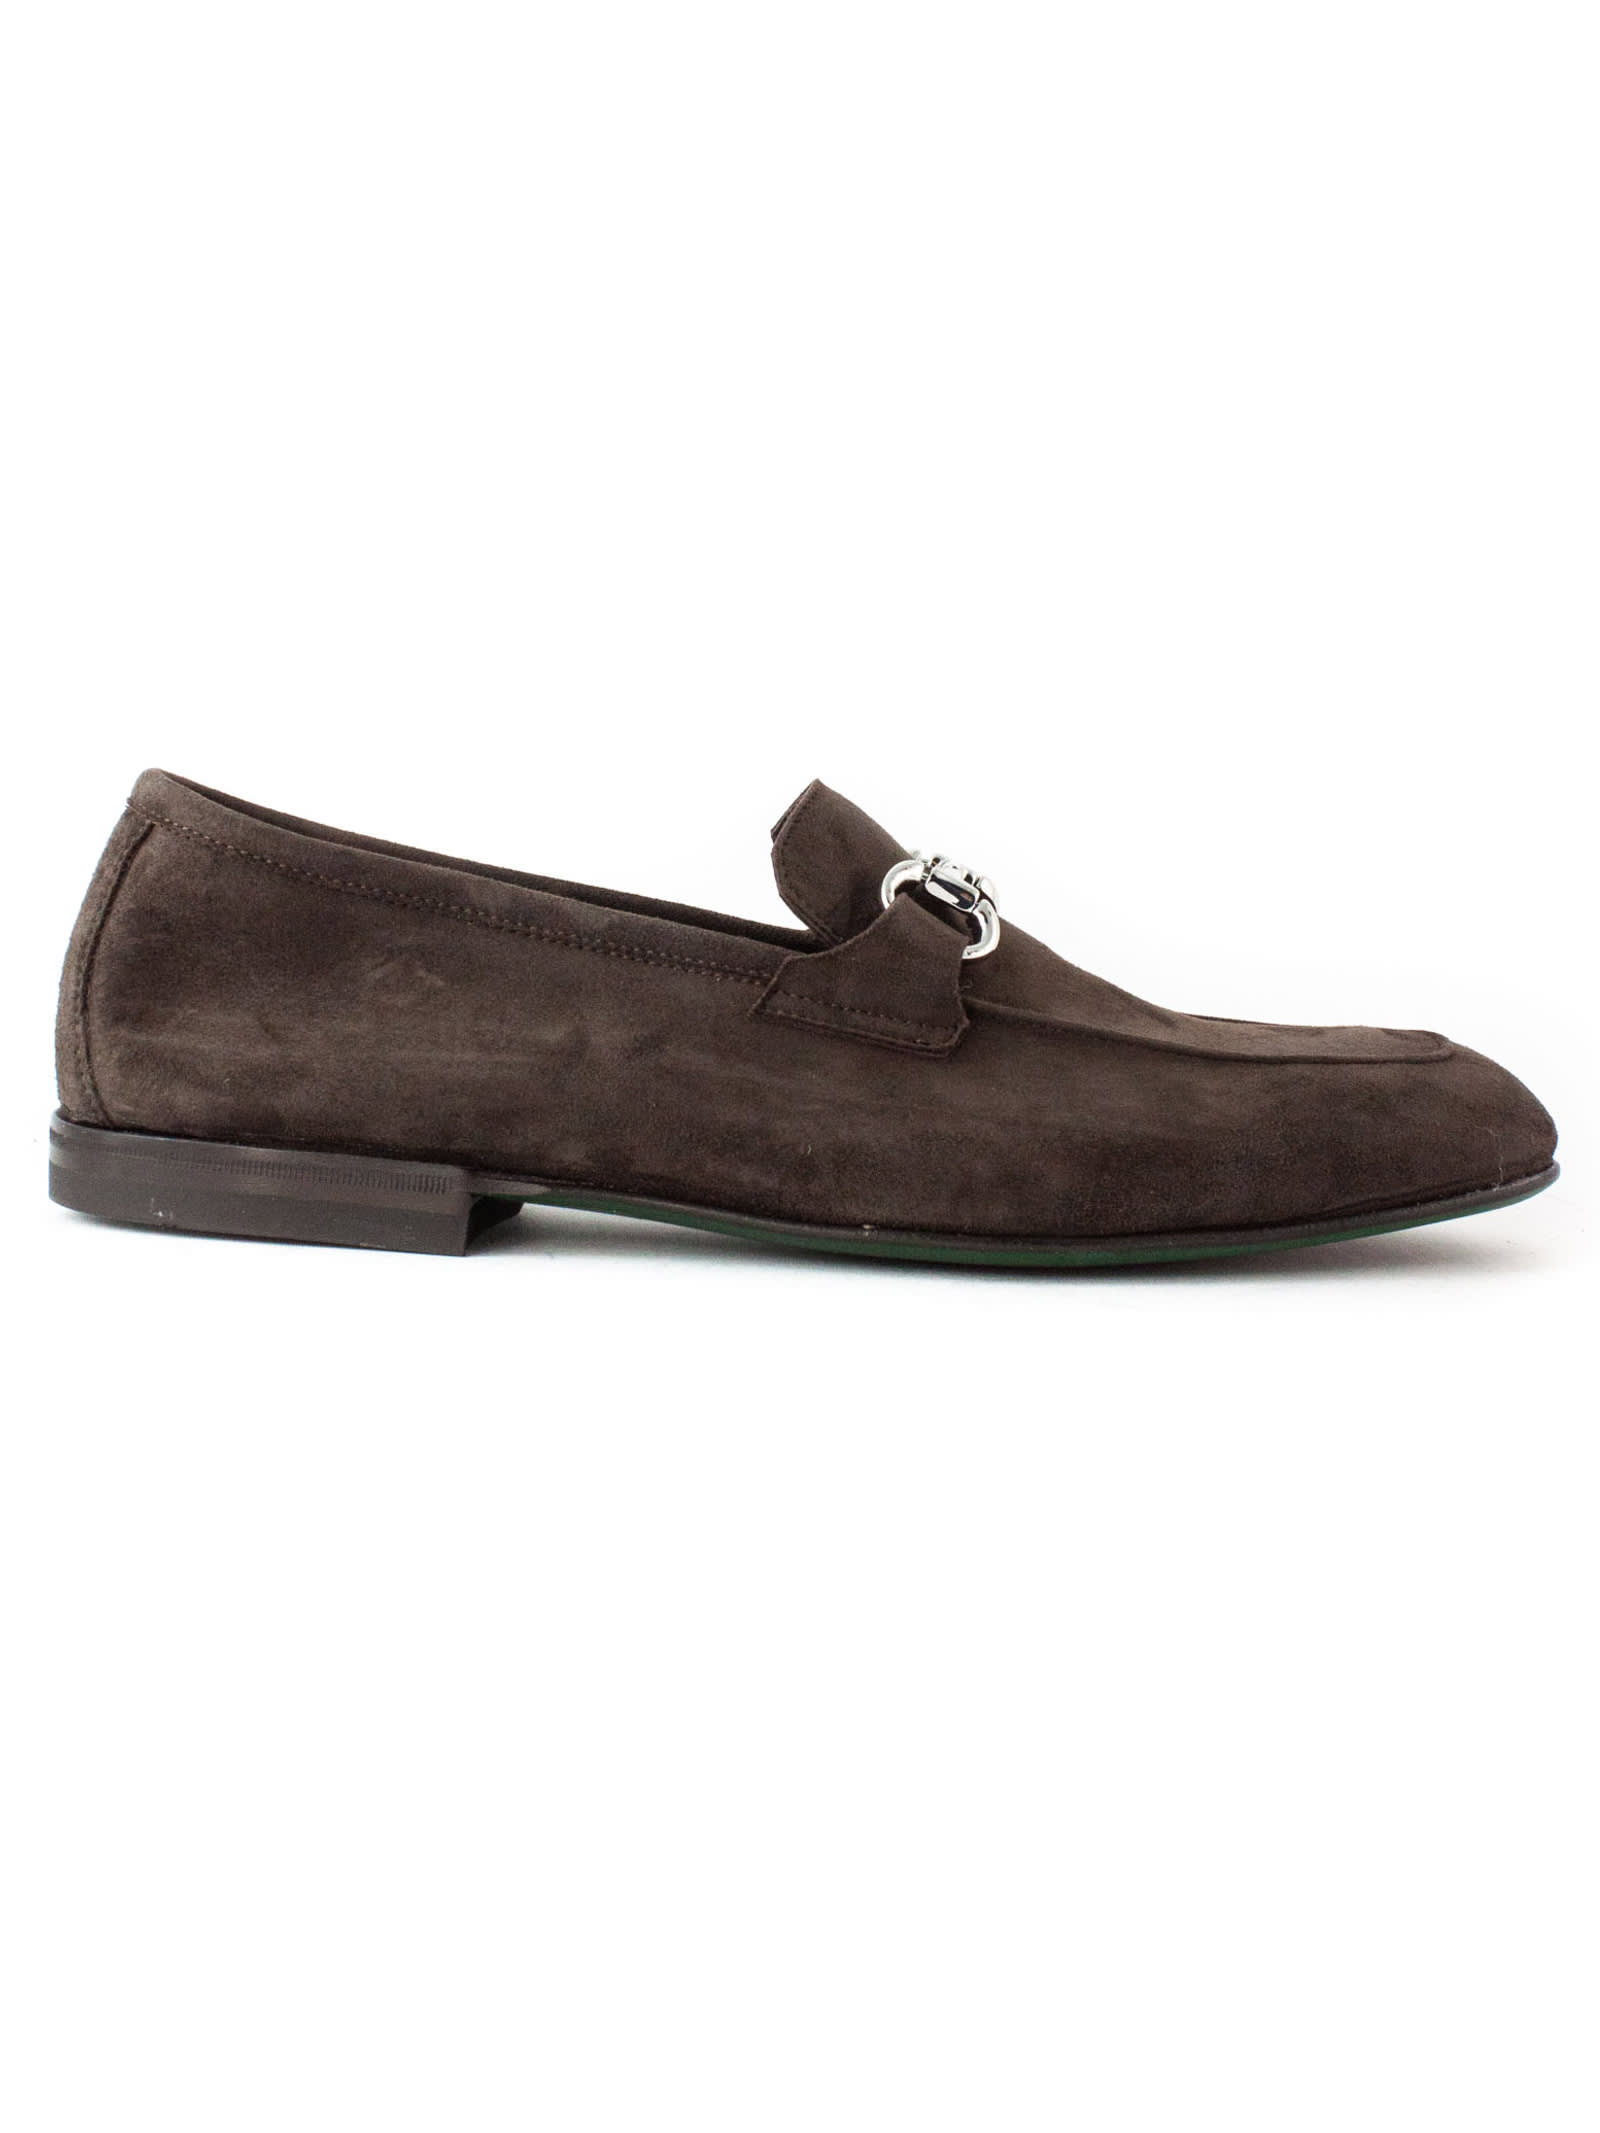 GREEN GEORGE BROWN SUEDE LOAFER